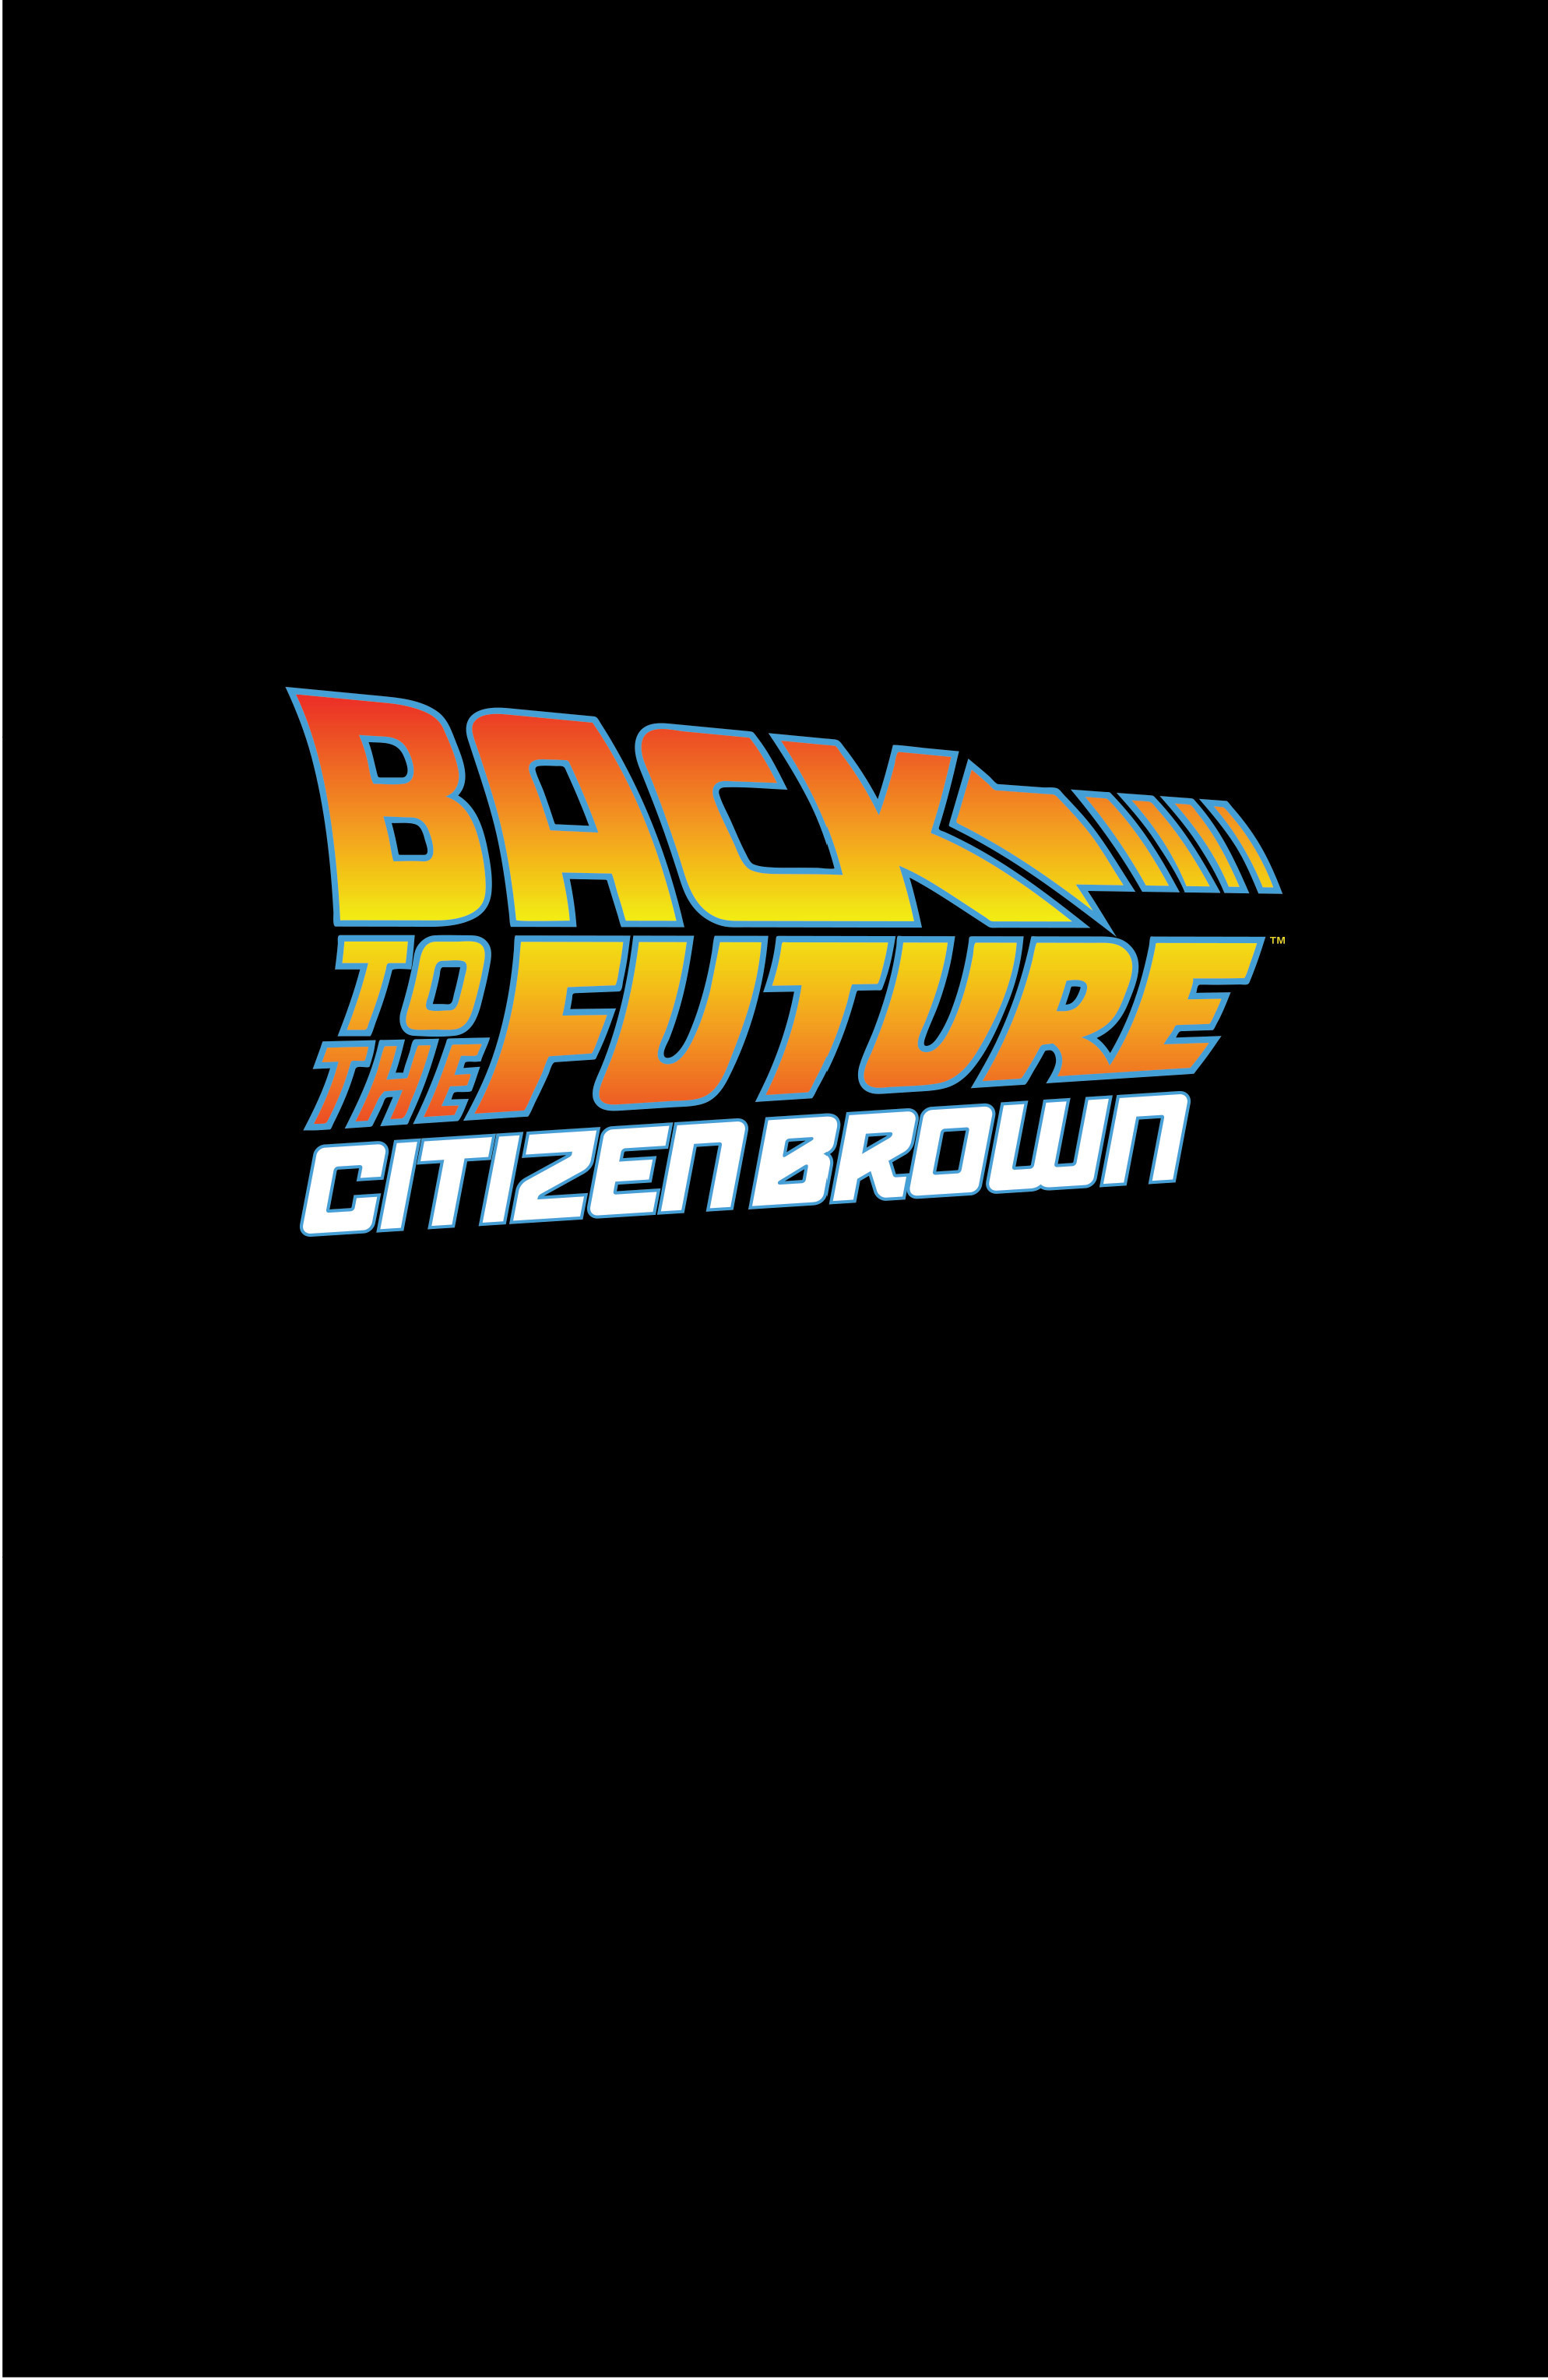 Read online Back to the Future: Citizen Brown comic -  Issue #1 - 39